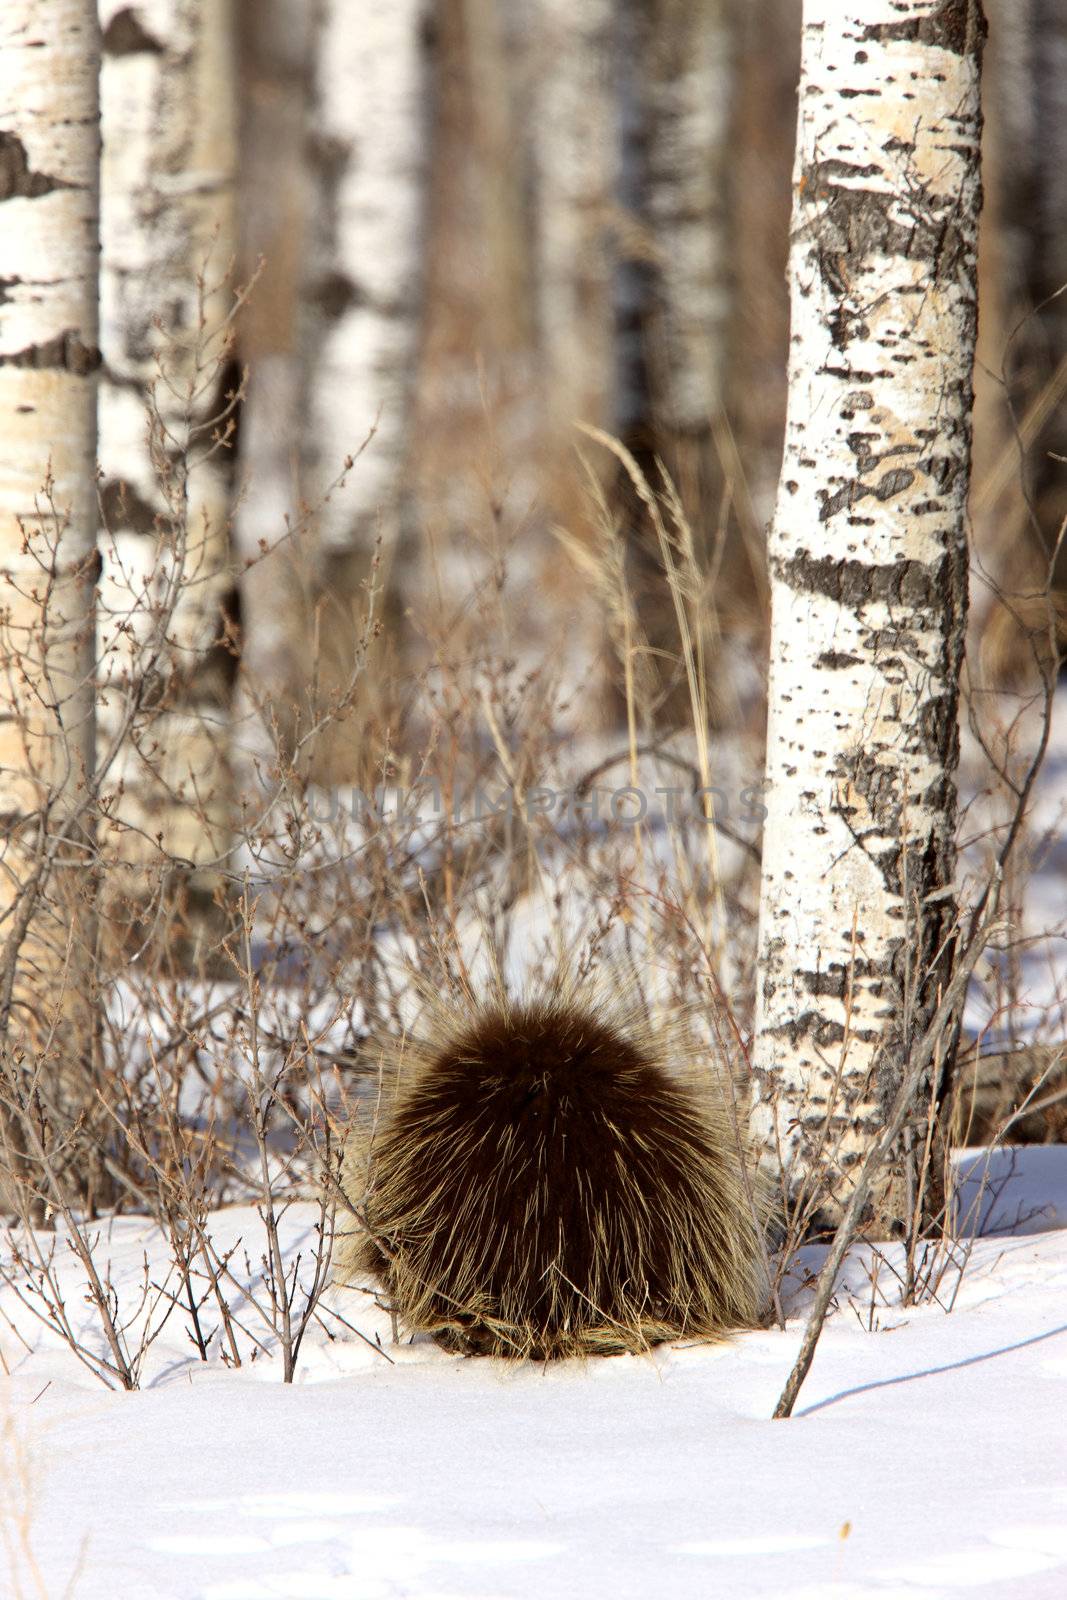 Porcupine and Aspen Trees in Winter by pictureguy